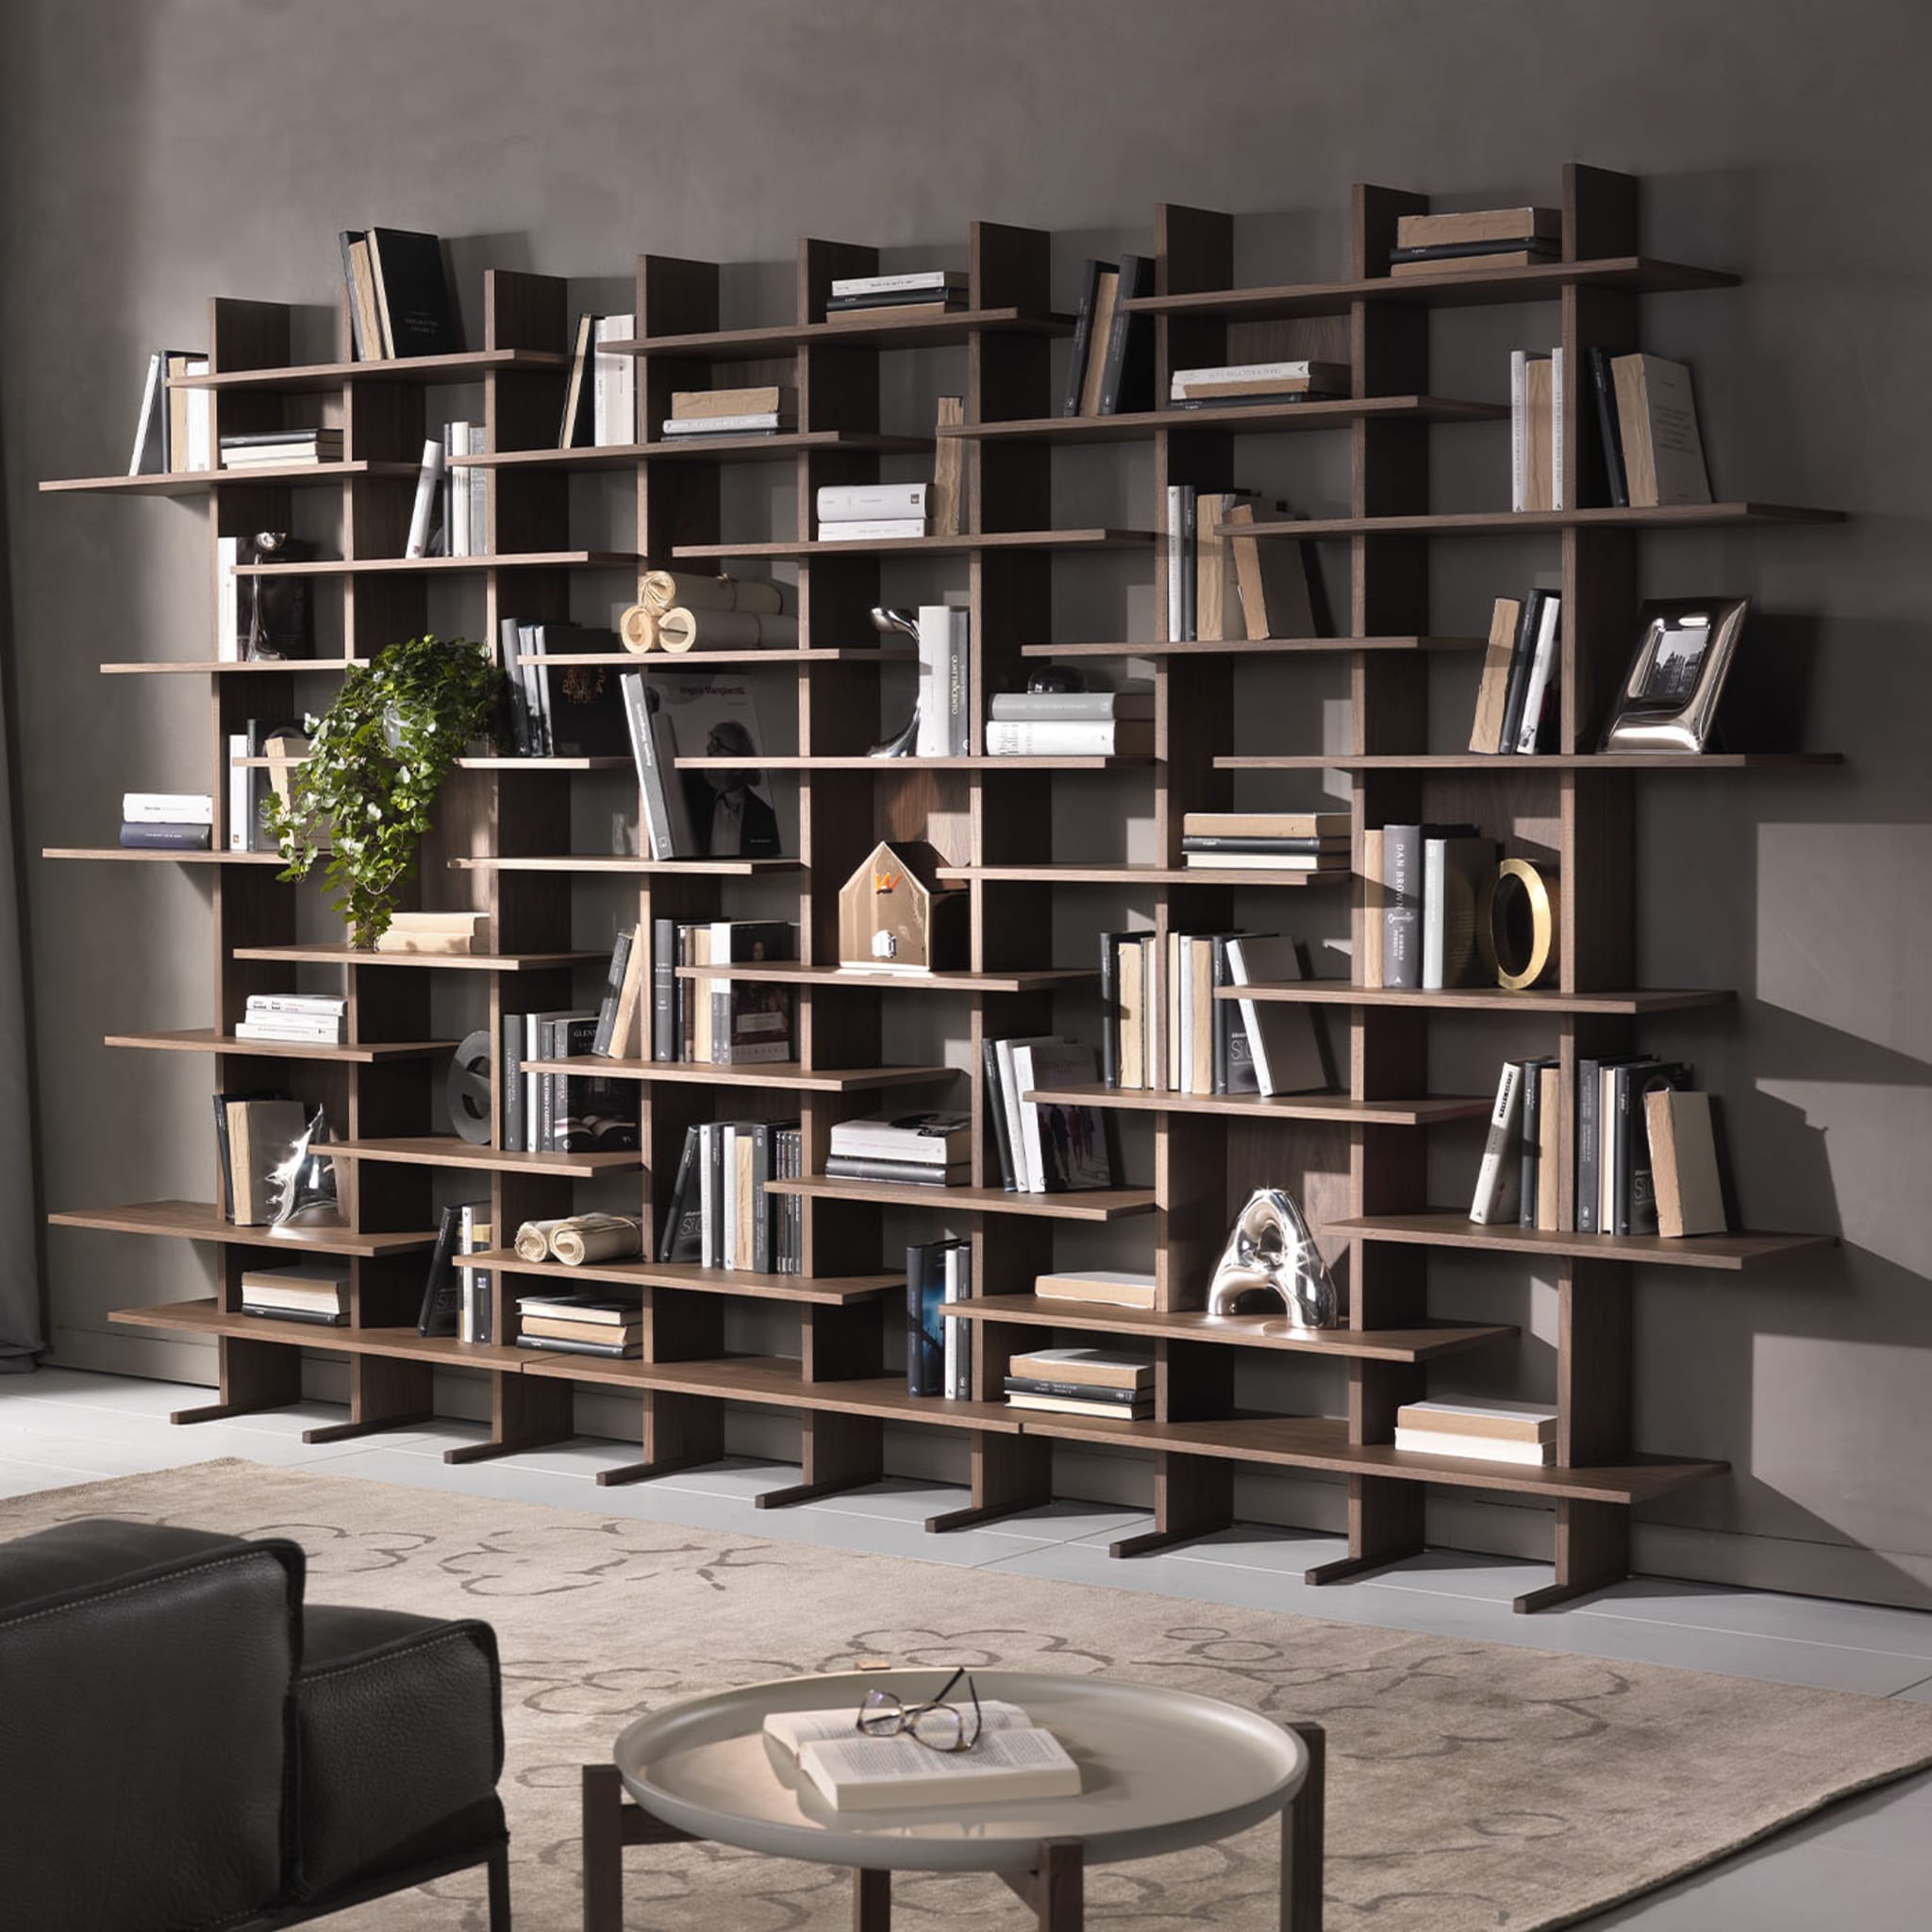 Elisabeth Bookcase #4 by Cesare Arosio and Beatrice Fanchini - Alternative view 1